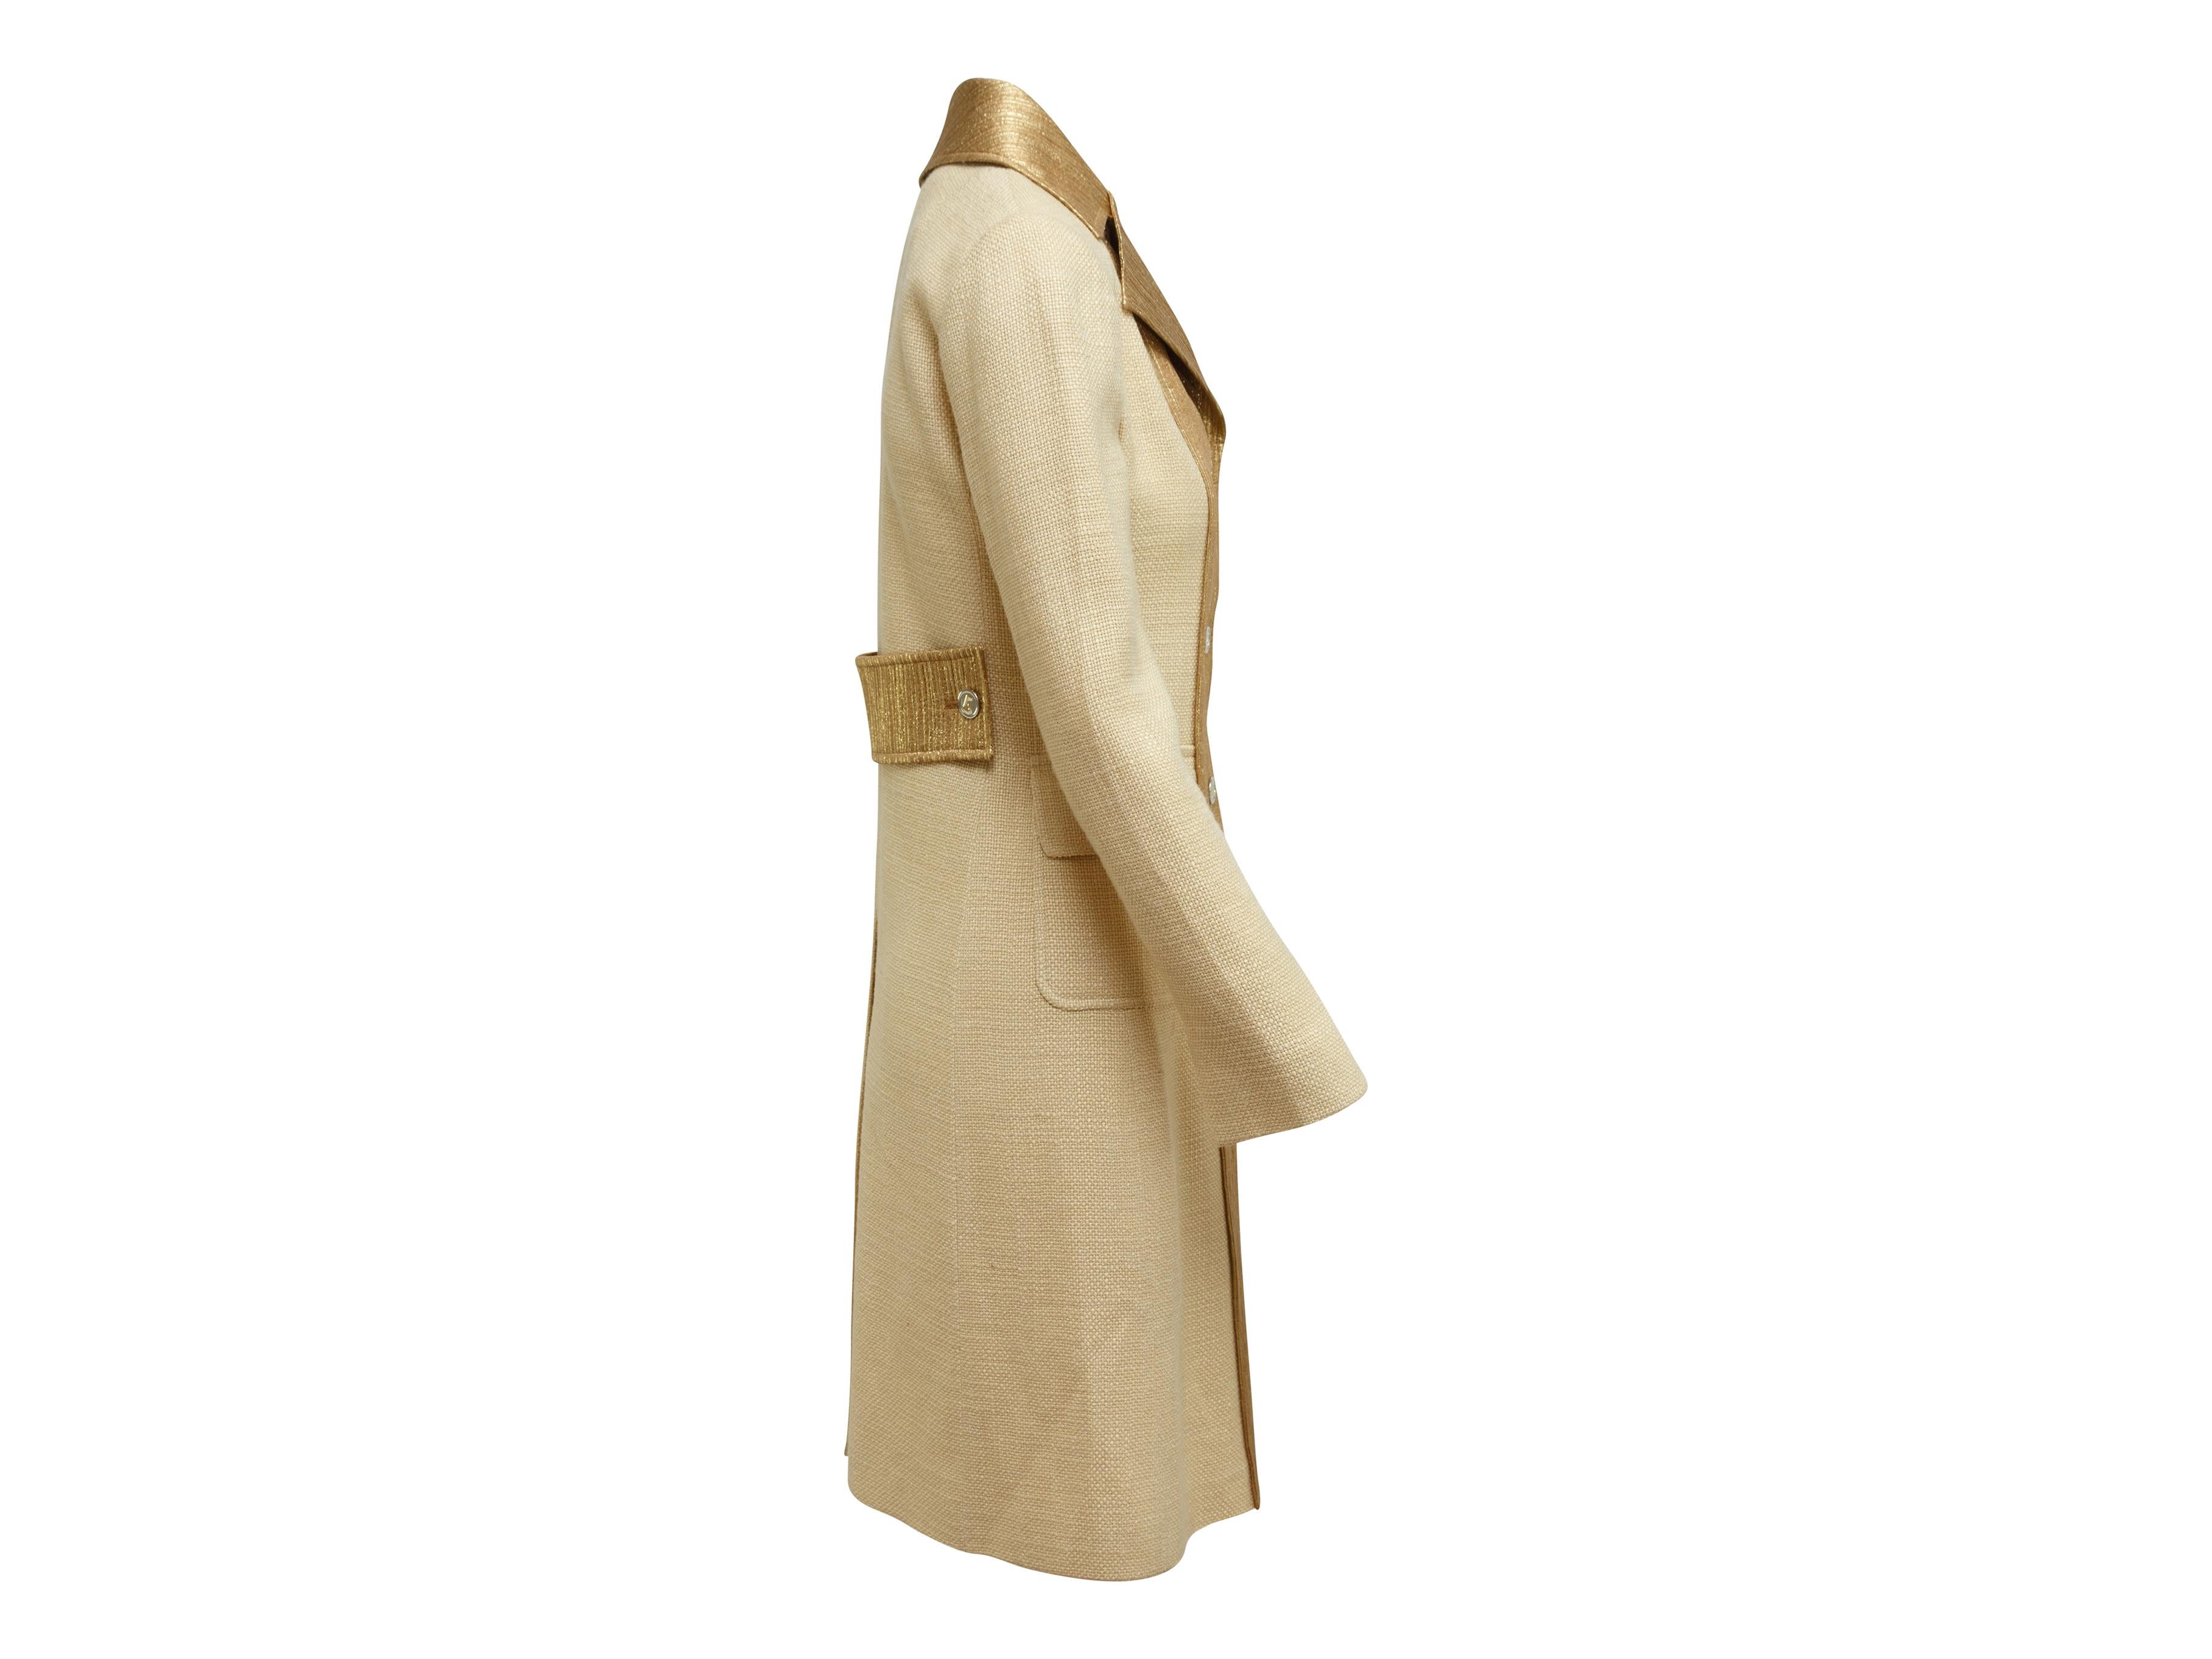 Product details: Tan and gold long coat by Dolce & Gabbana. Notch collar. Dual flap pockets at hips. Button closures at center front. Designer size 40. 35